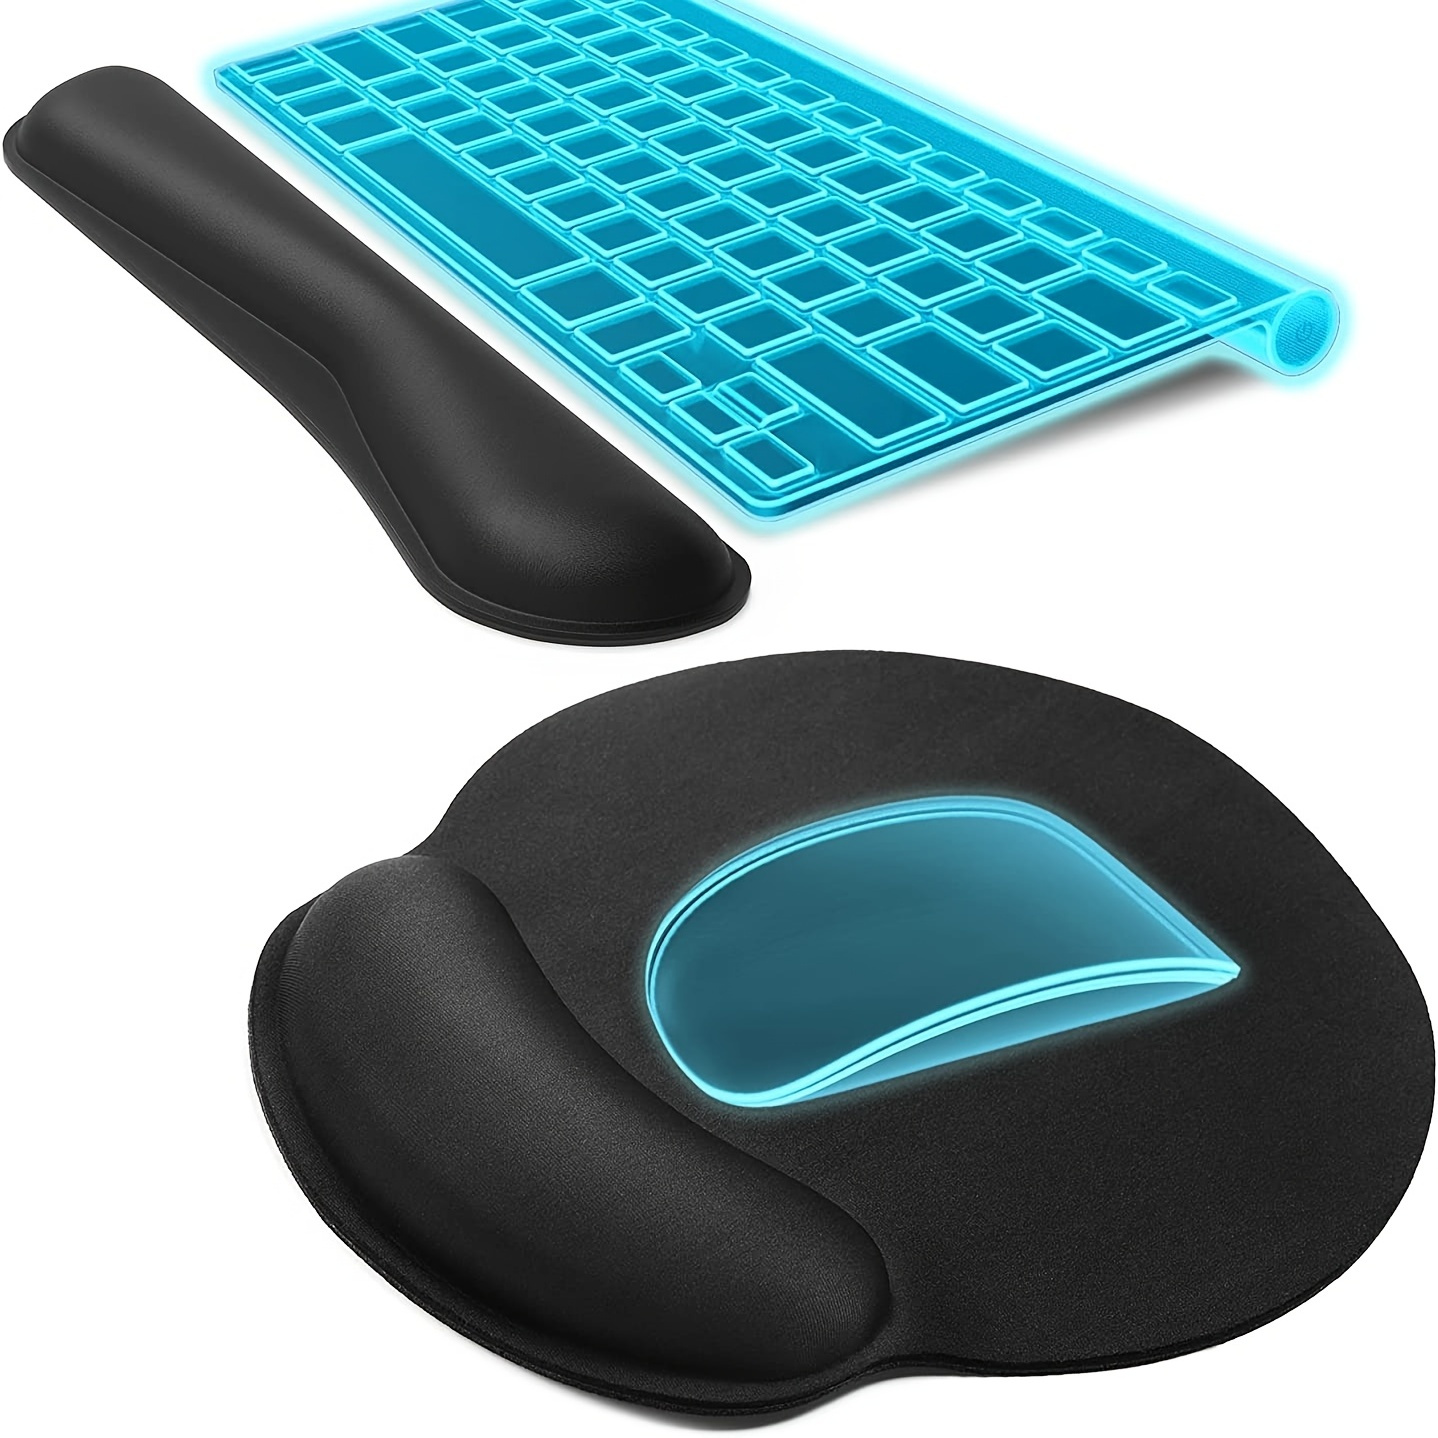 Ergonomic Mouse Pad, With Wrist Support, Comfortable Keyboard Wrist Rest,  Keyboard Memory Foam Wrist Pad, Mouse Pad Set, Convenient For Typing And  Computer, Office And Family, Black